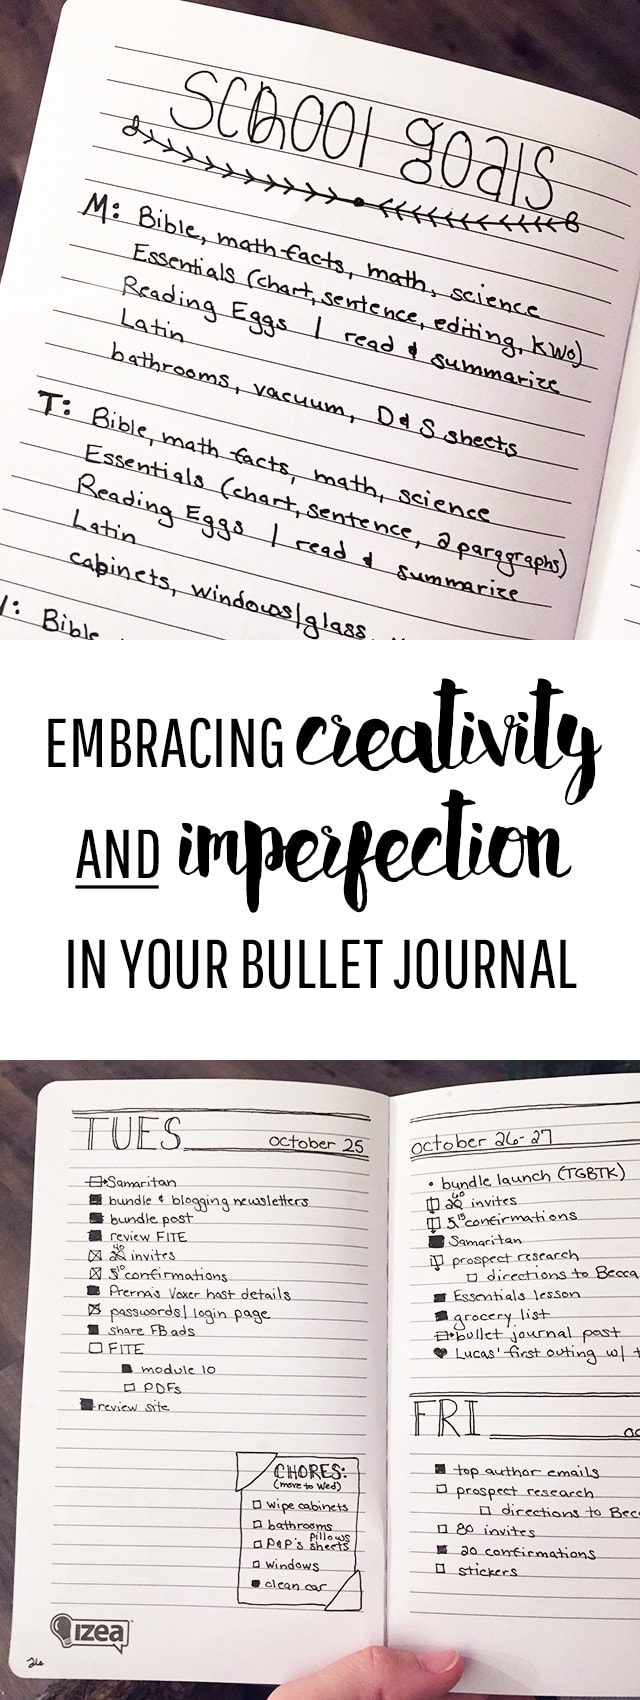 Embracing creativity AND imperfection in your bullet journal